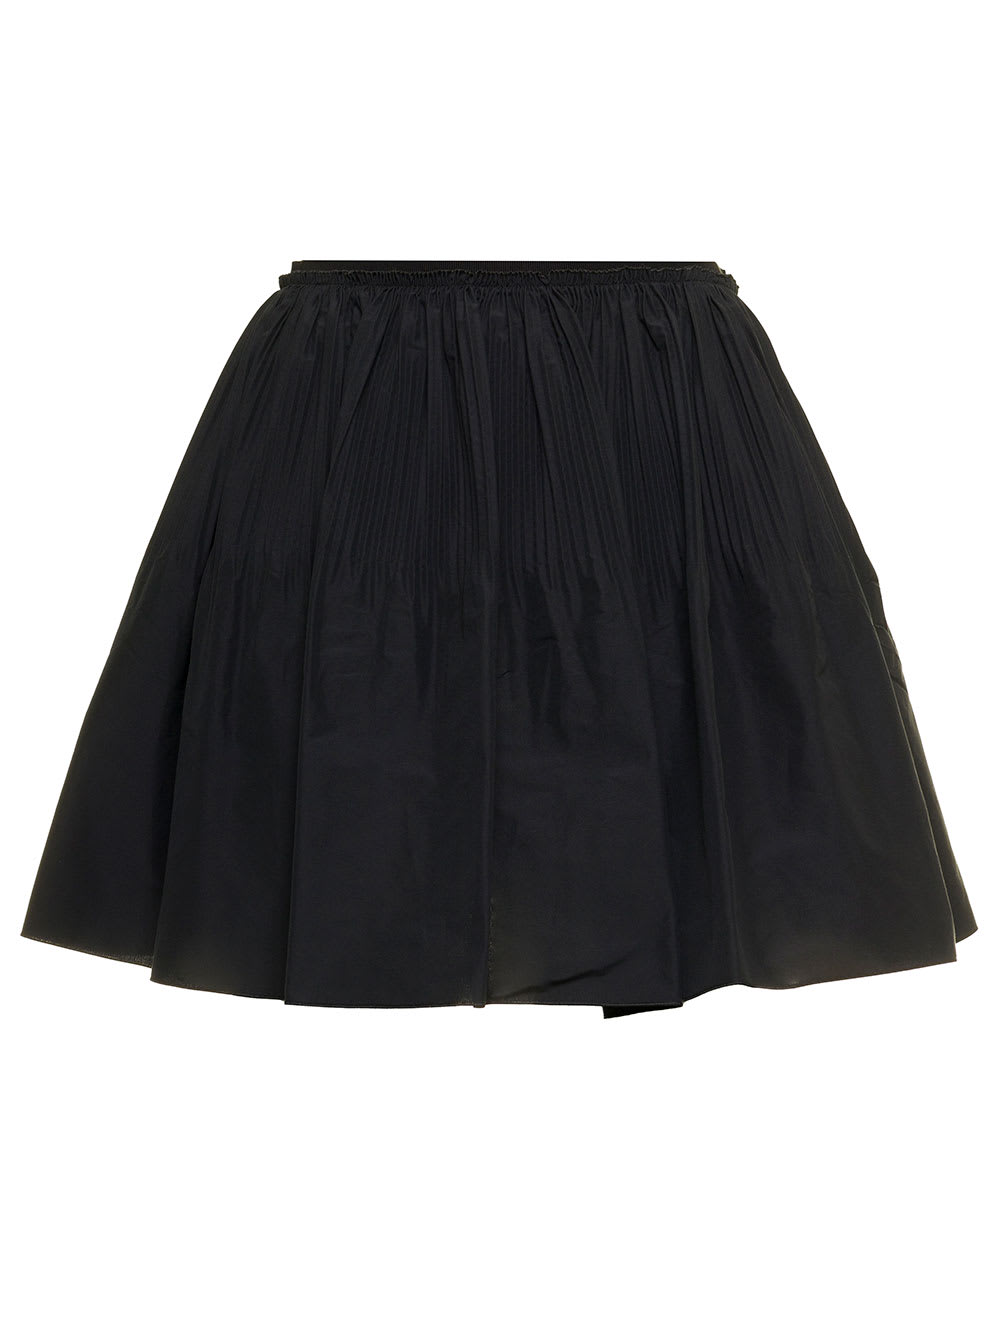 Red Valentino Womans Black Pleated Skirt